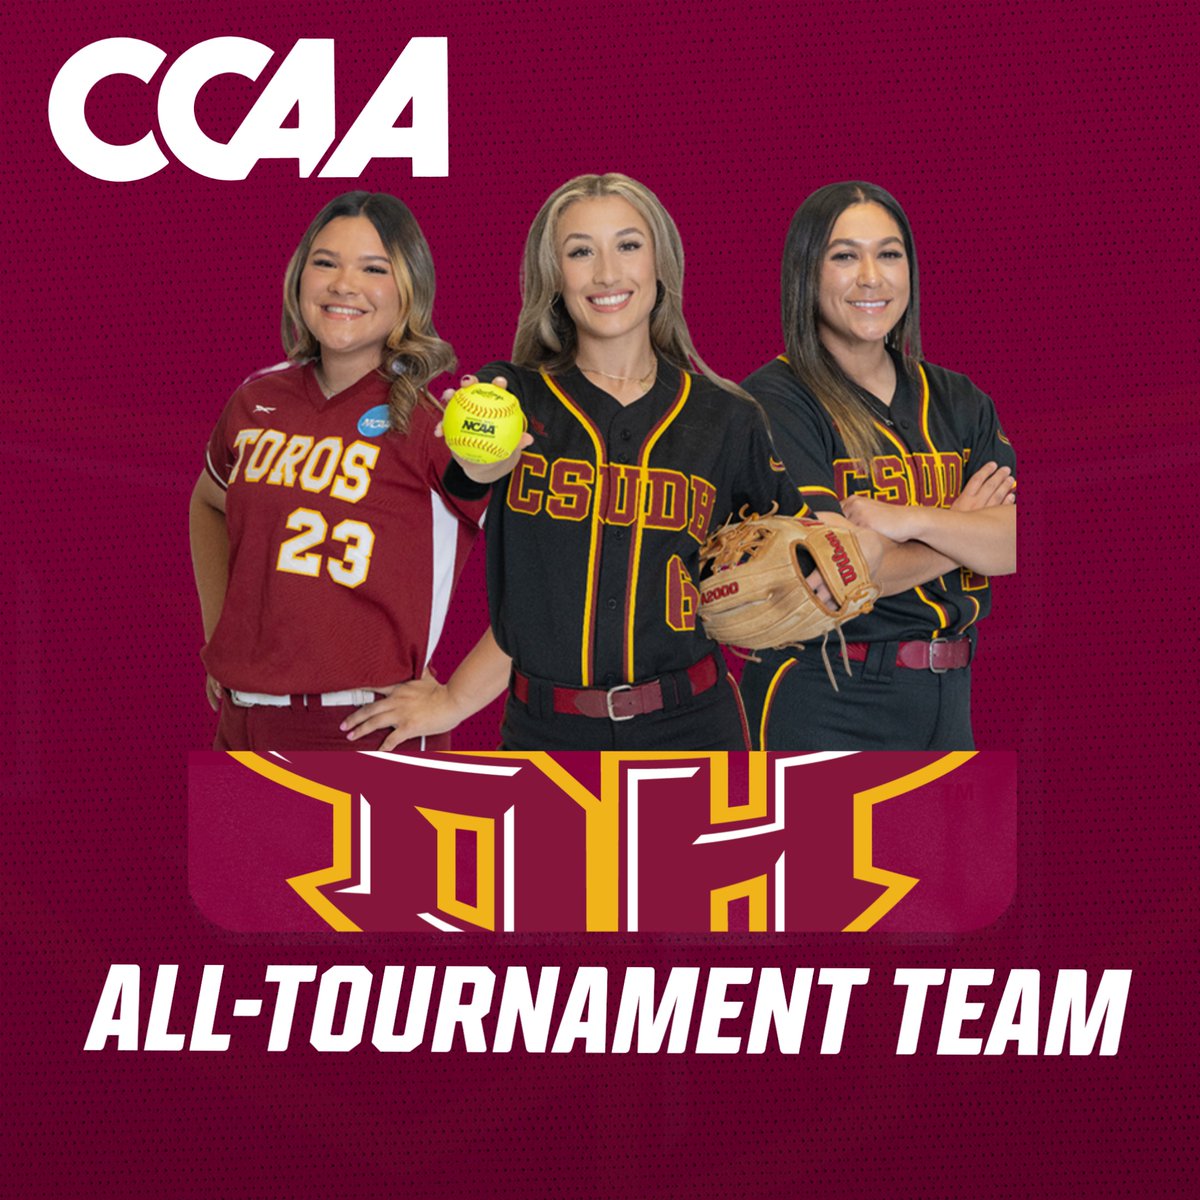 Jay Ross, Alexis Aguado, and Mariah Ramirez were selected to the CCAA All-Tournament Team for their outstanding performance with @csudhsoftball at the CCAA Championship Tournament!